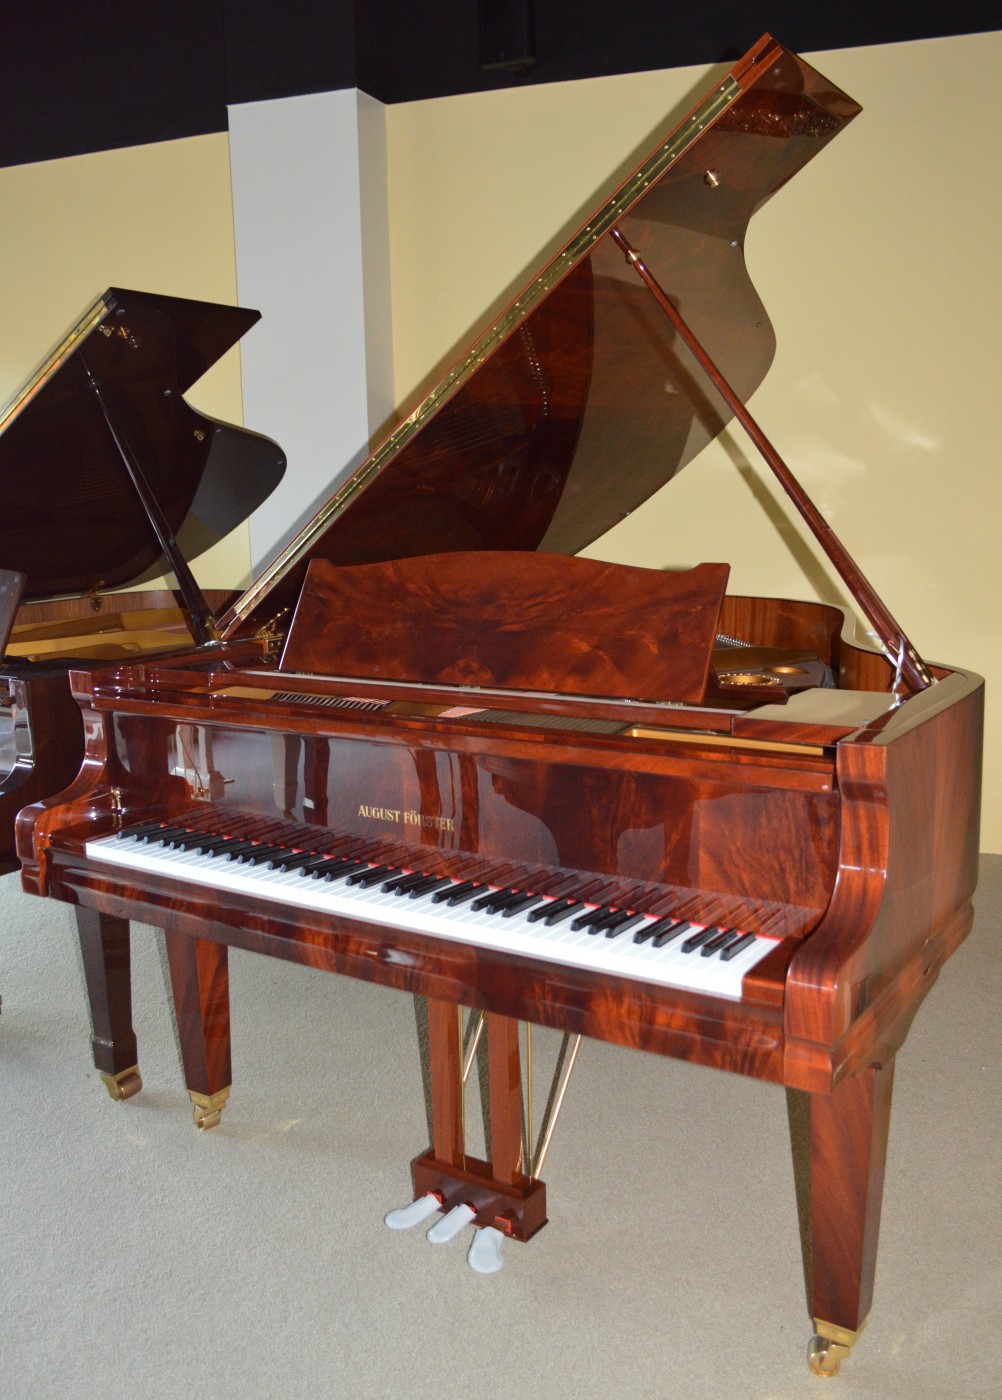 August Forster Grand Piano for Sale in Manchester | Roger ...